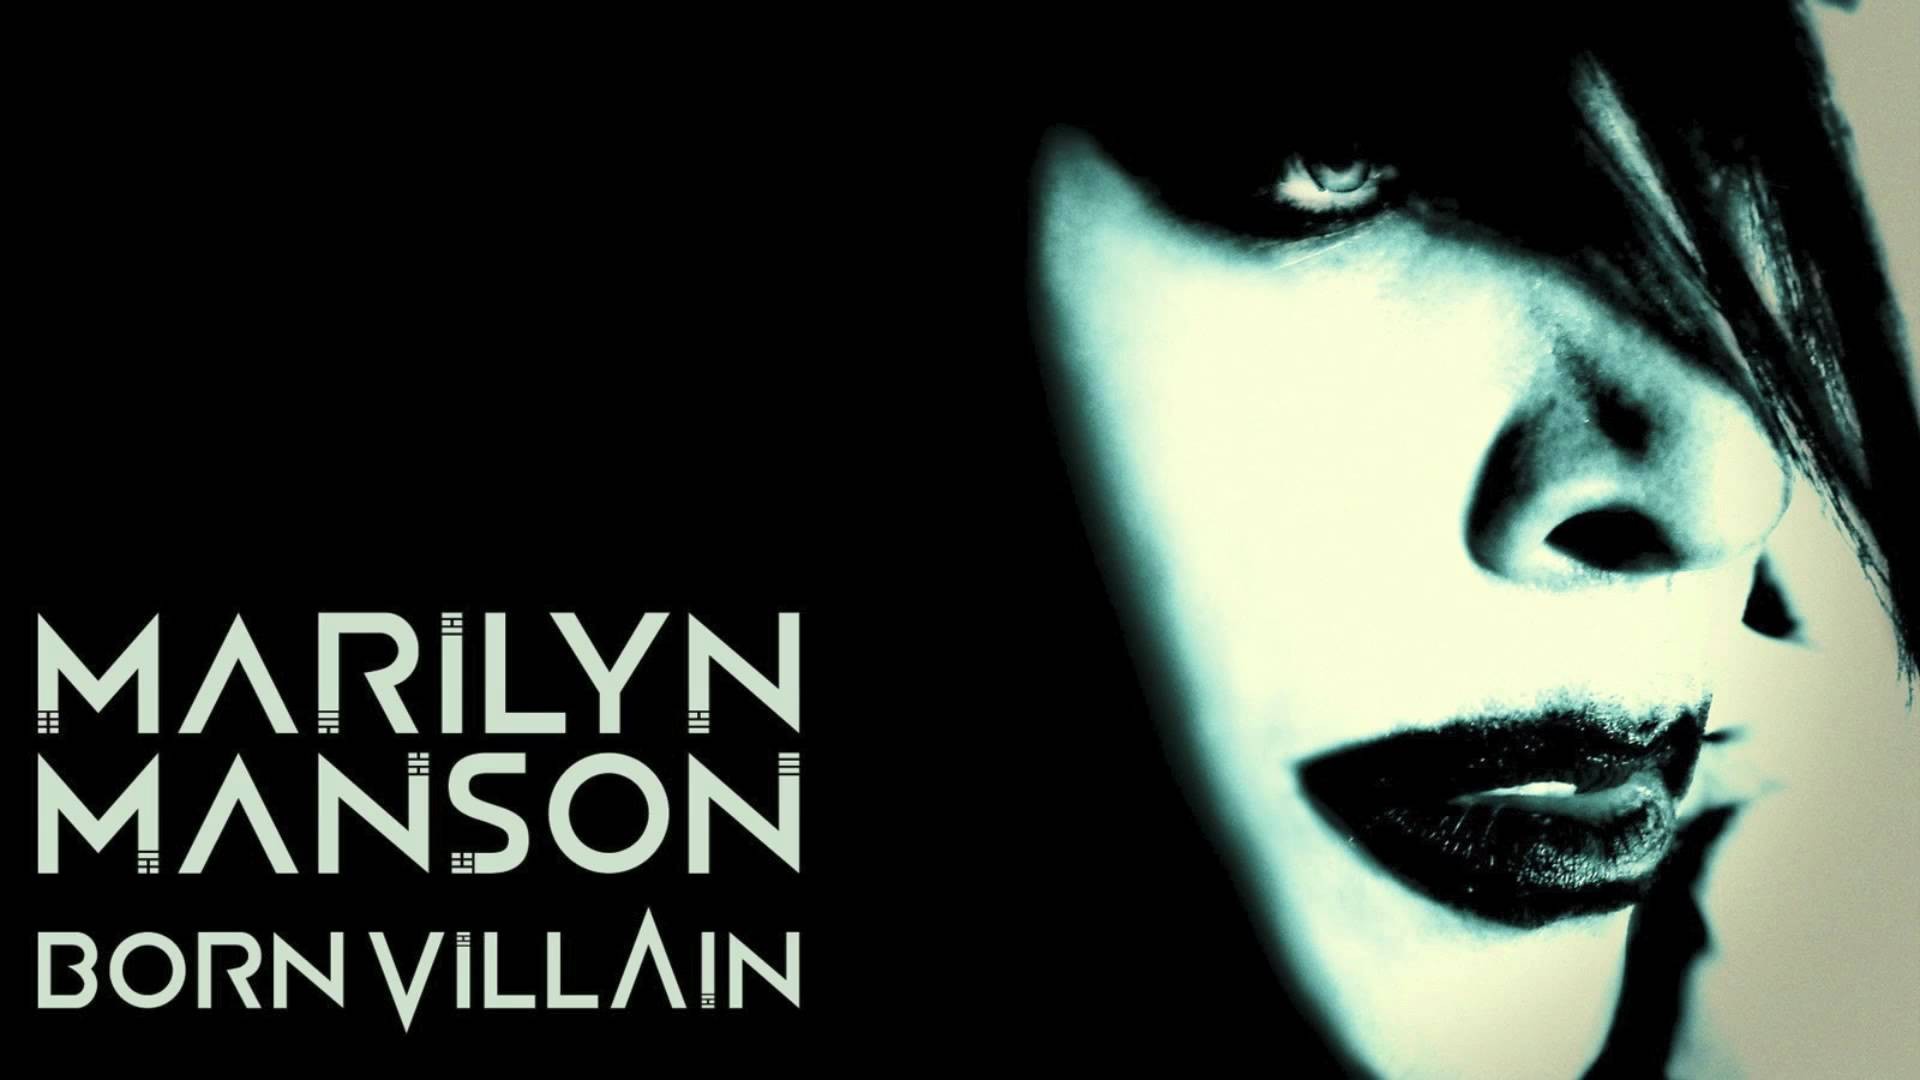 Marilyn Manson Typography Simple Background Music Musician Rock And Roll 1920x1080